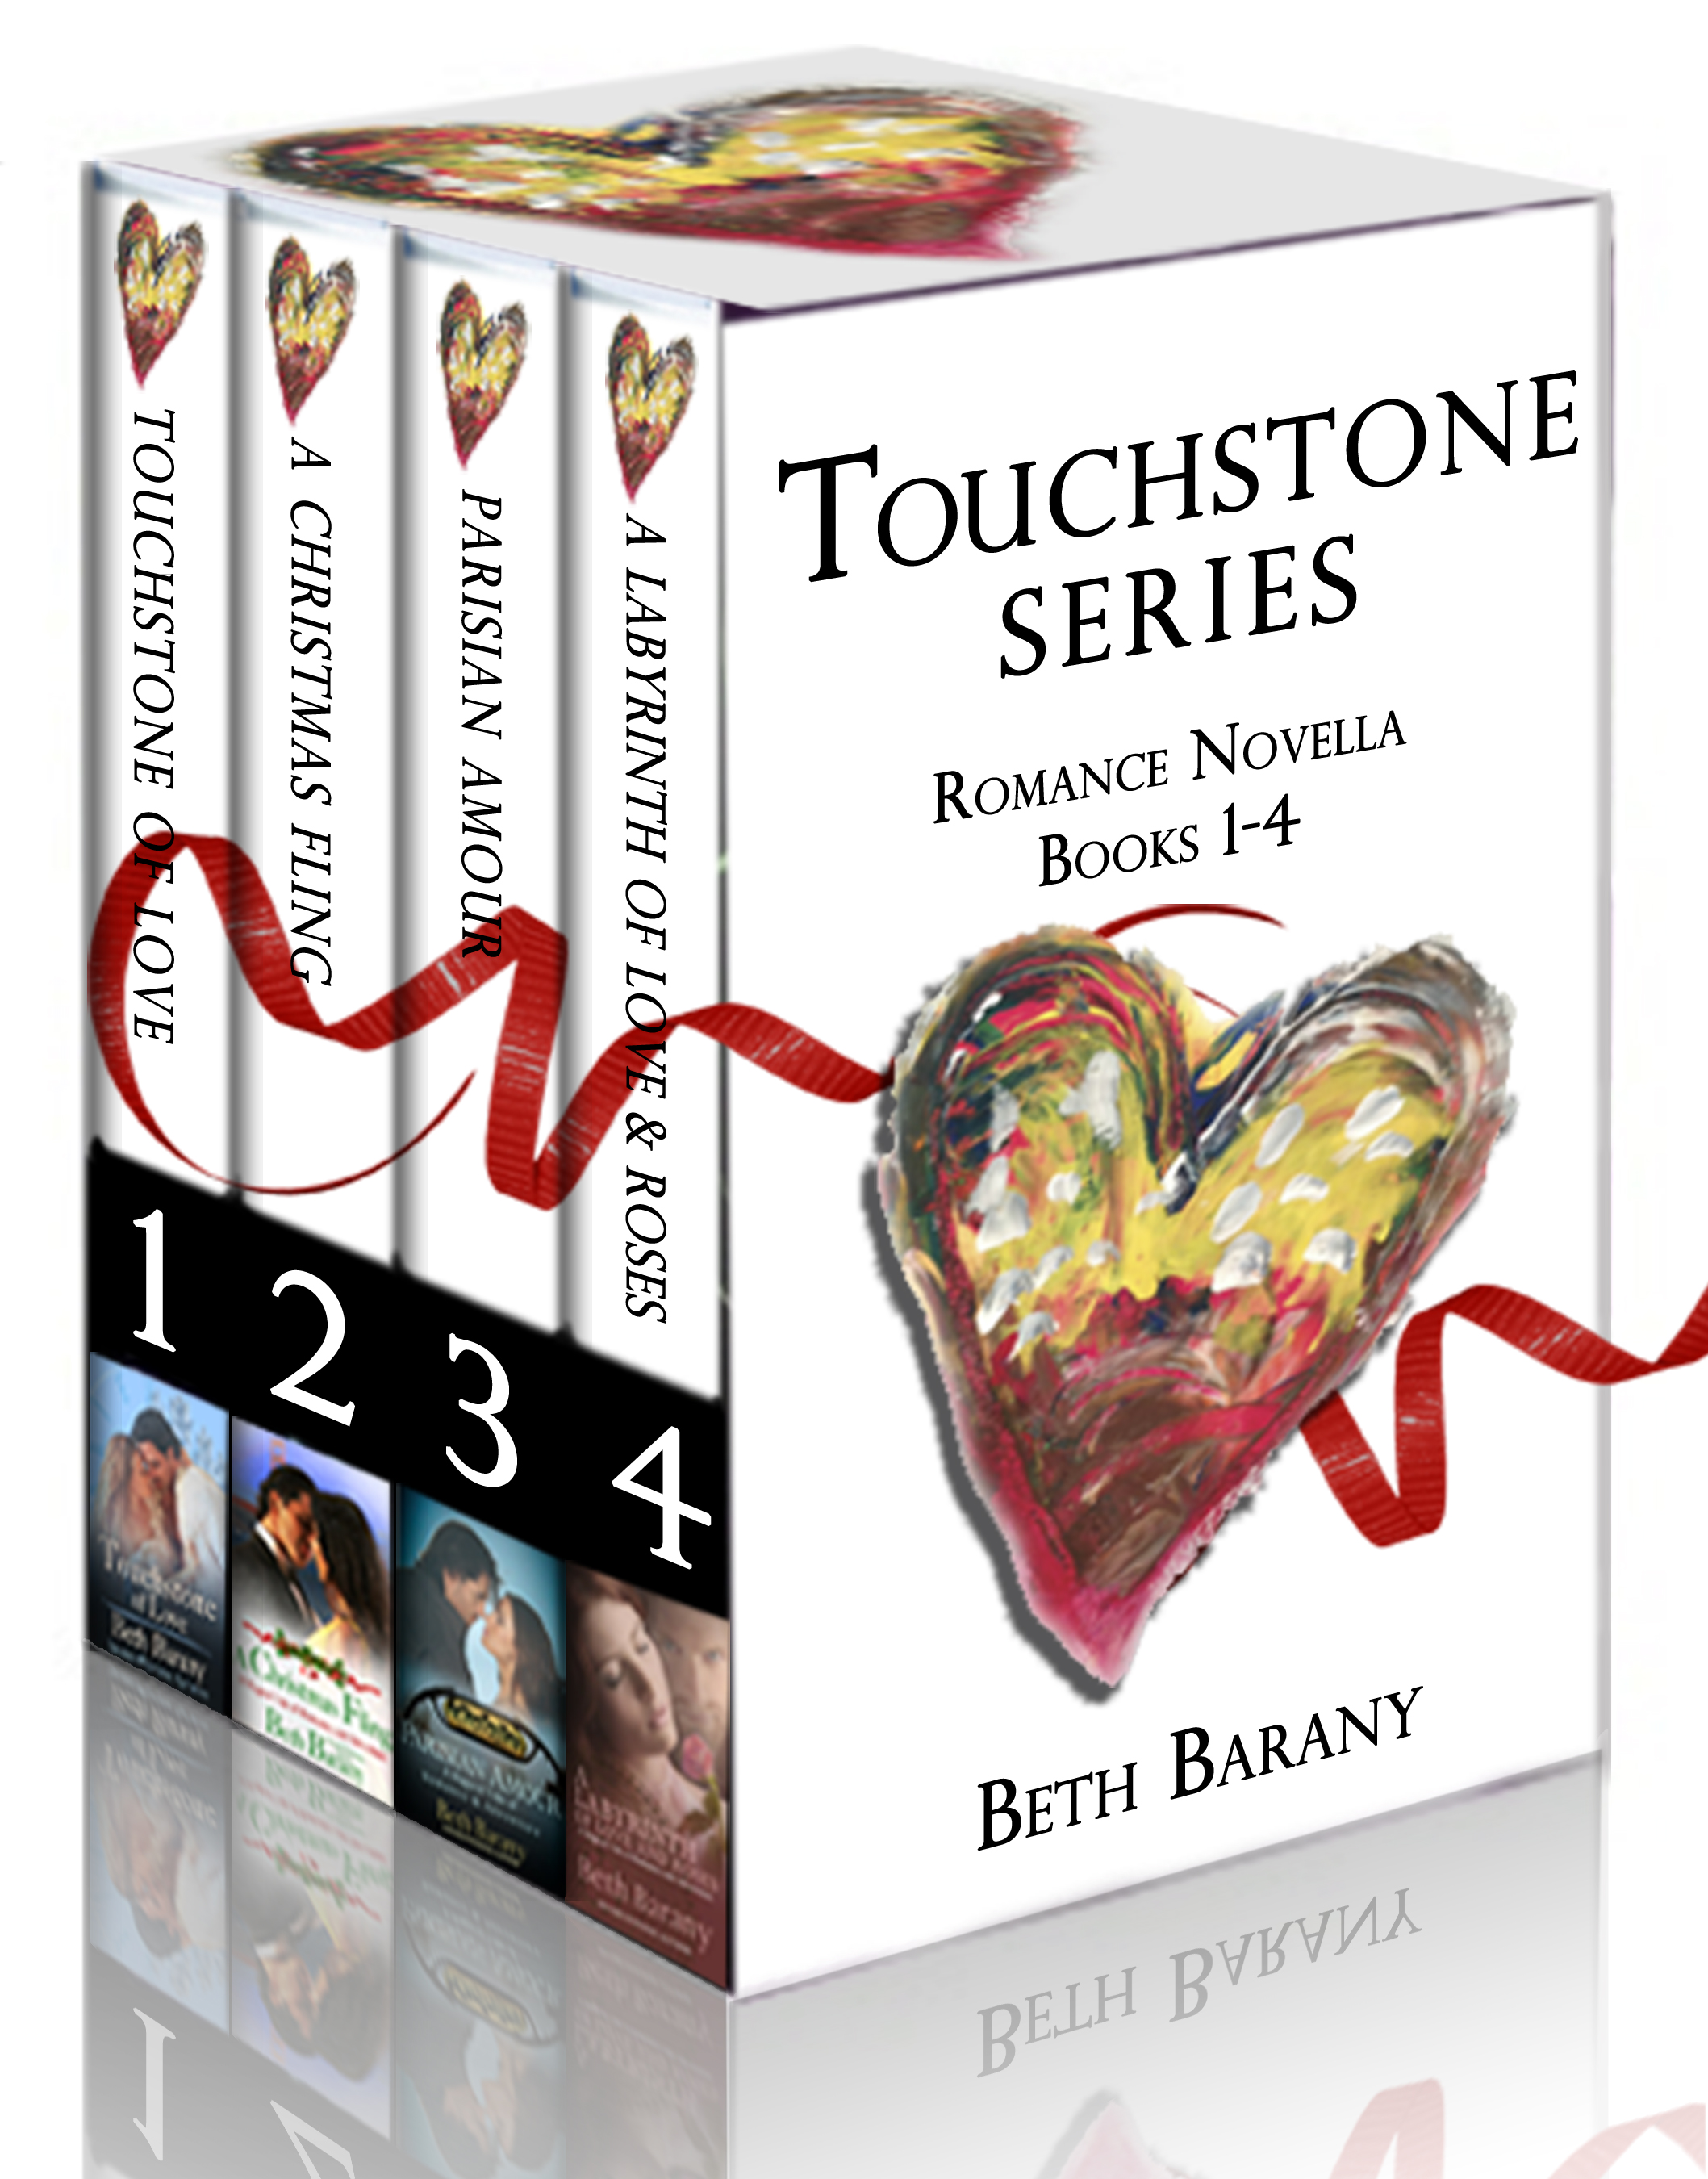 Touchstone Series by Beth Barany